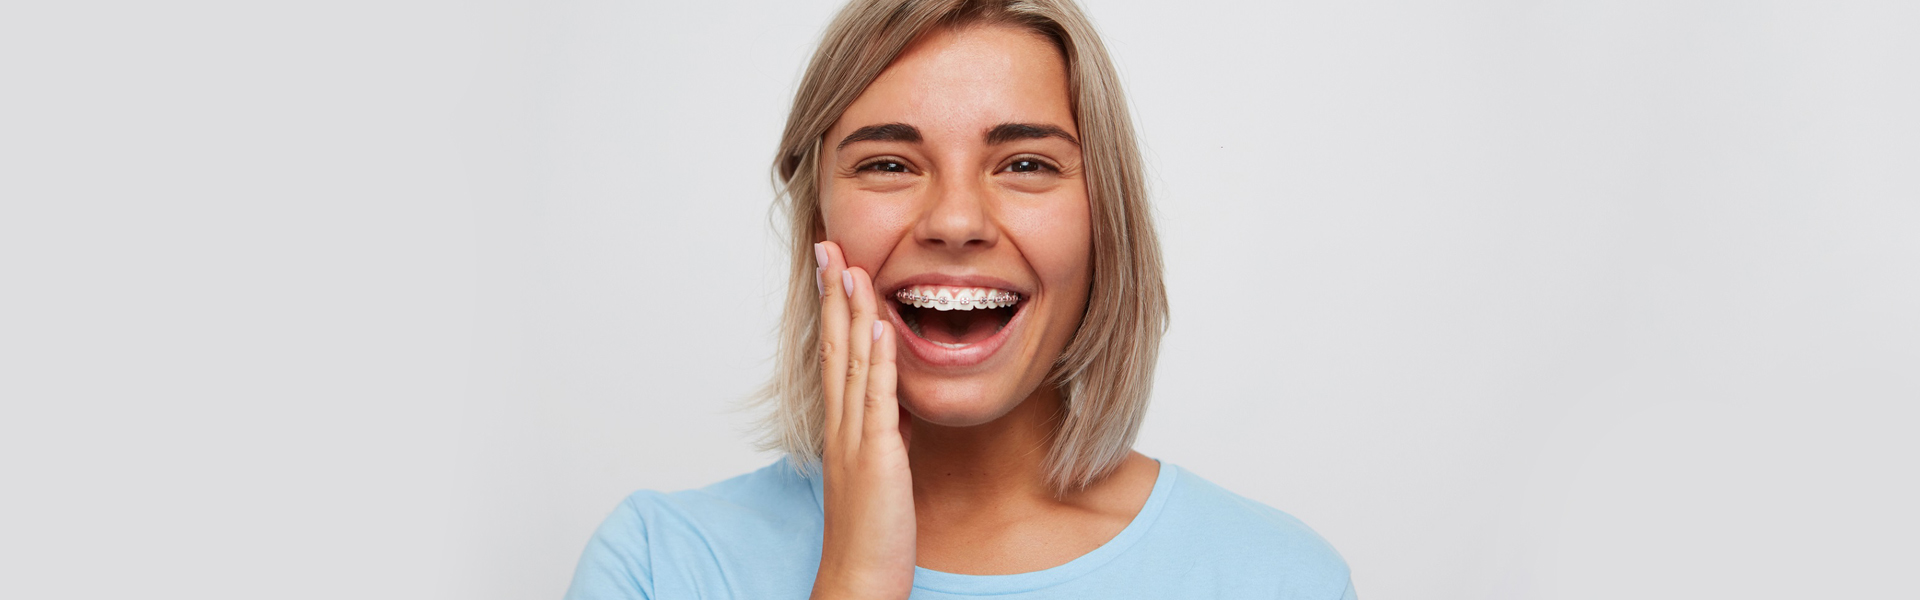 6 Facts You Should Know Before getting Braces